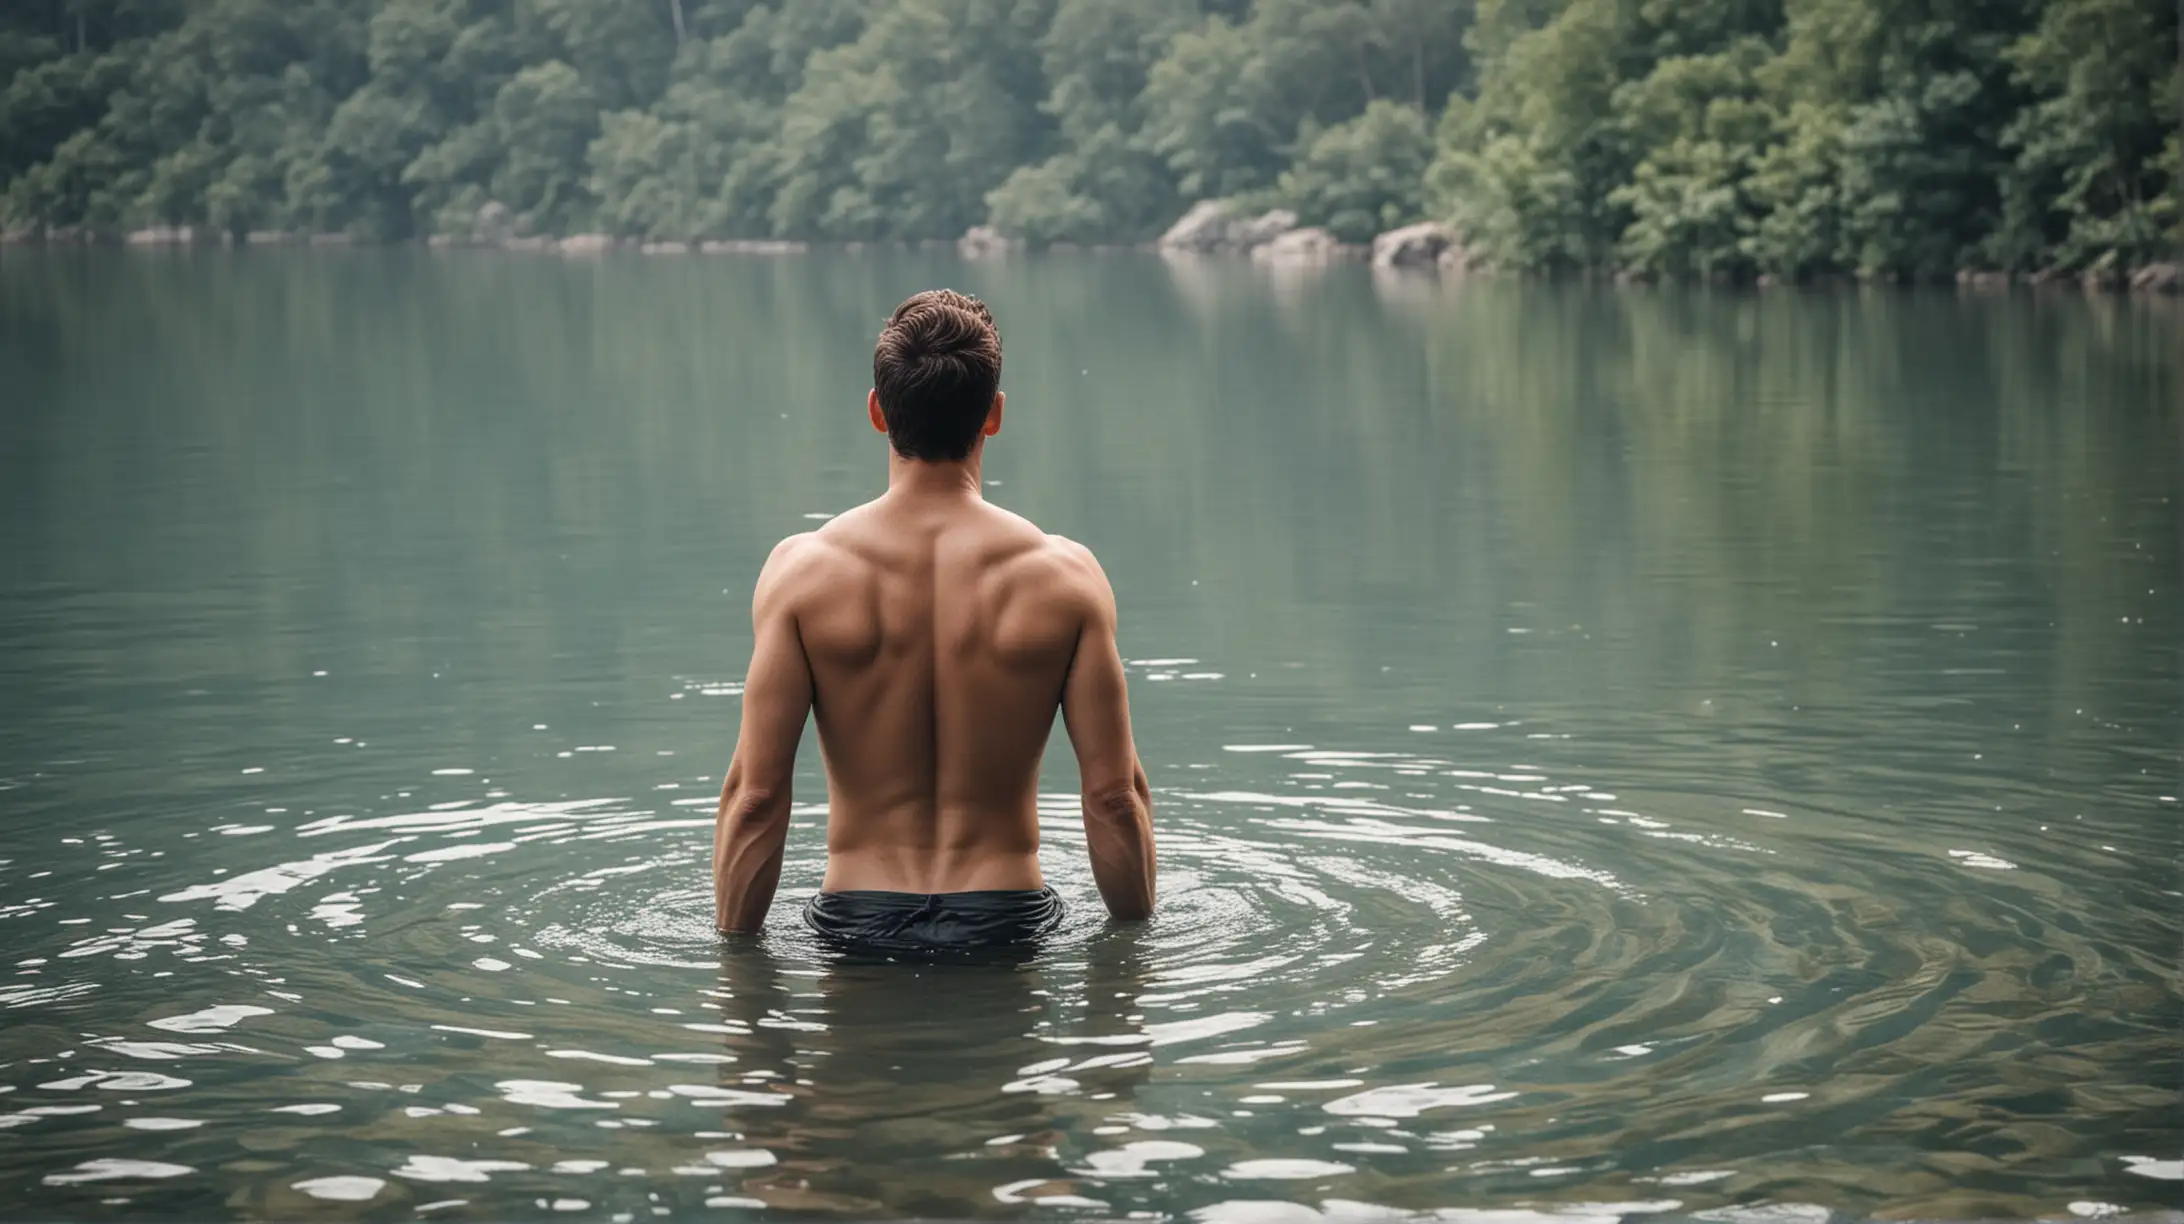 man standing in waist deep water,  shirtless, taking in the view, image be from the viewpoint of behind the man